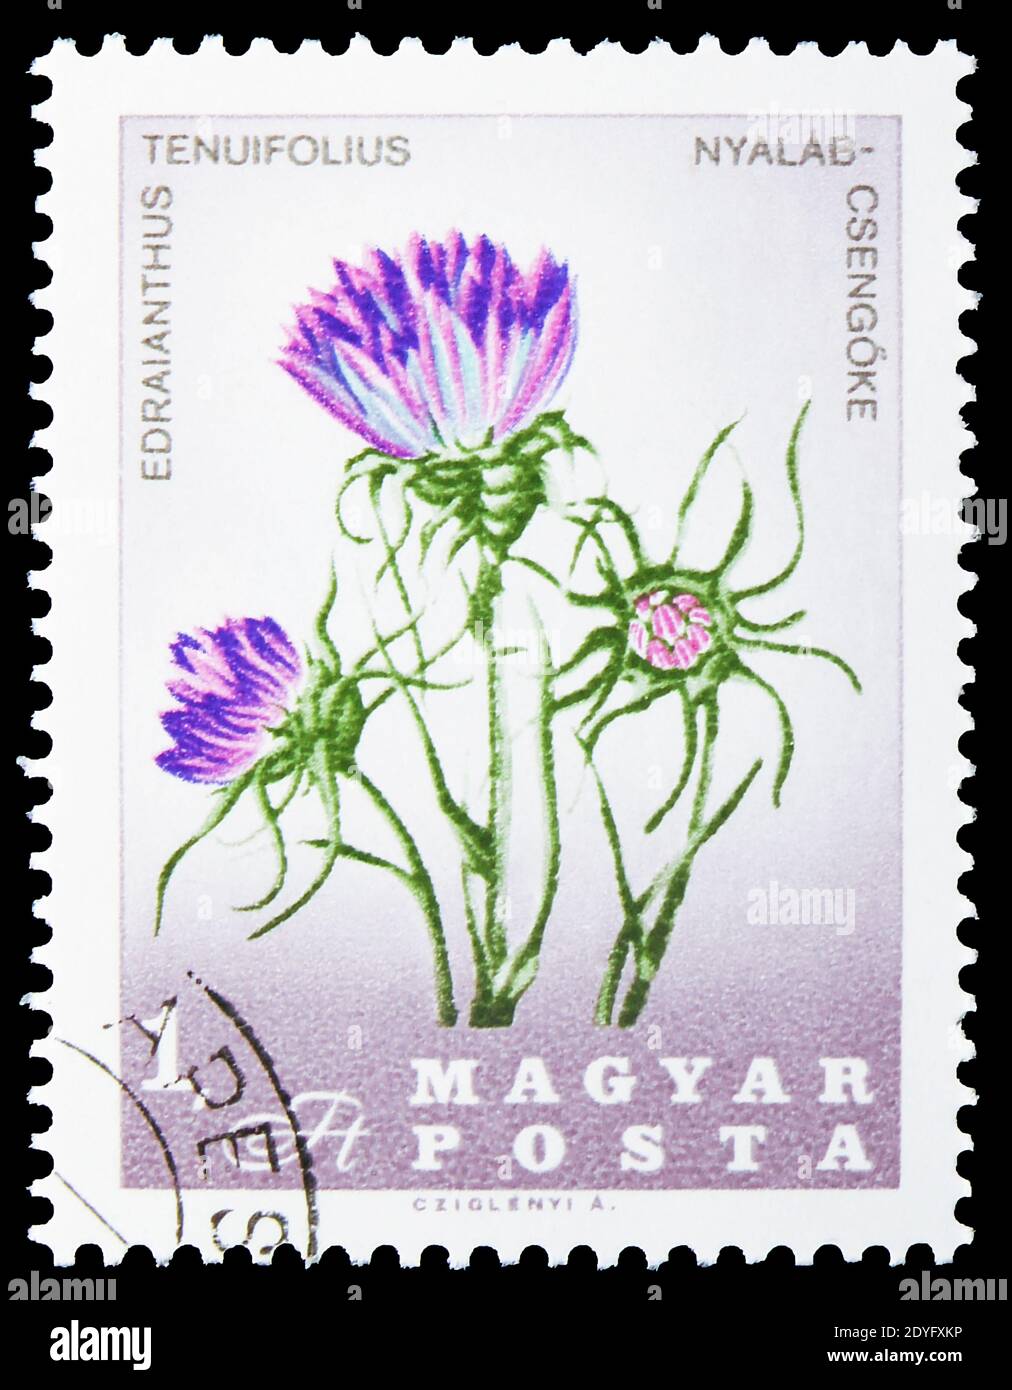 MOSCOW, RUSSIA - JULY 19, 2019: Postage stamp printed in Hungary shows Grassy Bells (Edraianthus tenuifolius), Flowers of the Carpathian Basin serie, Stock Photo